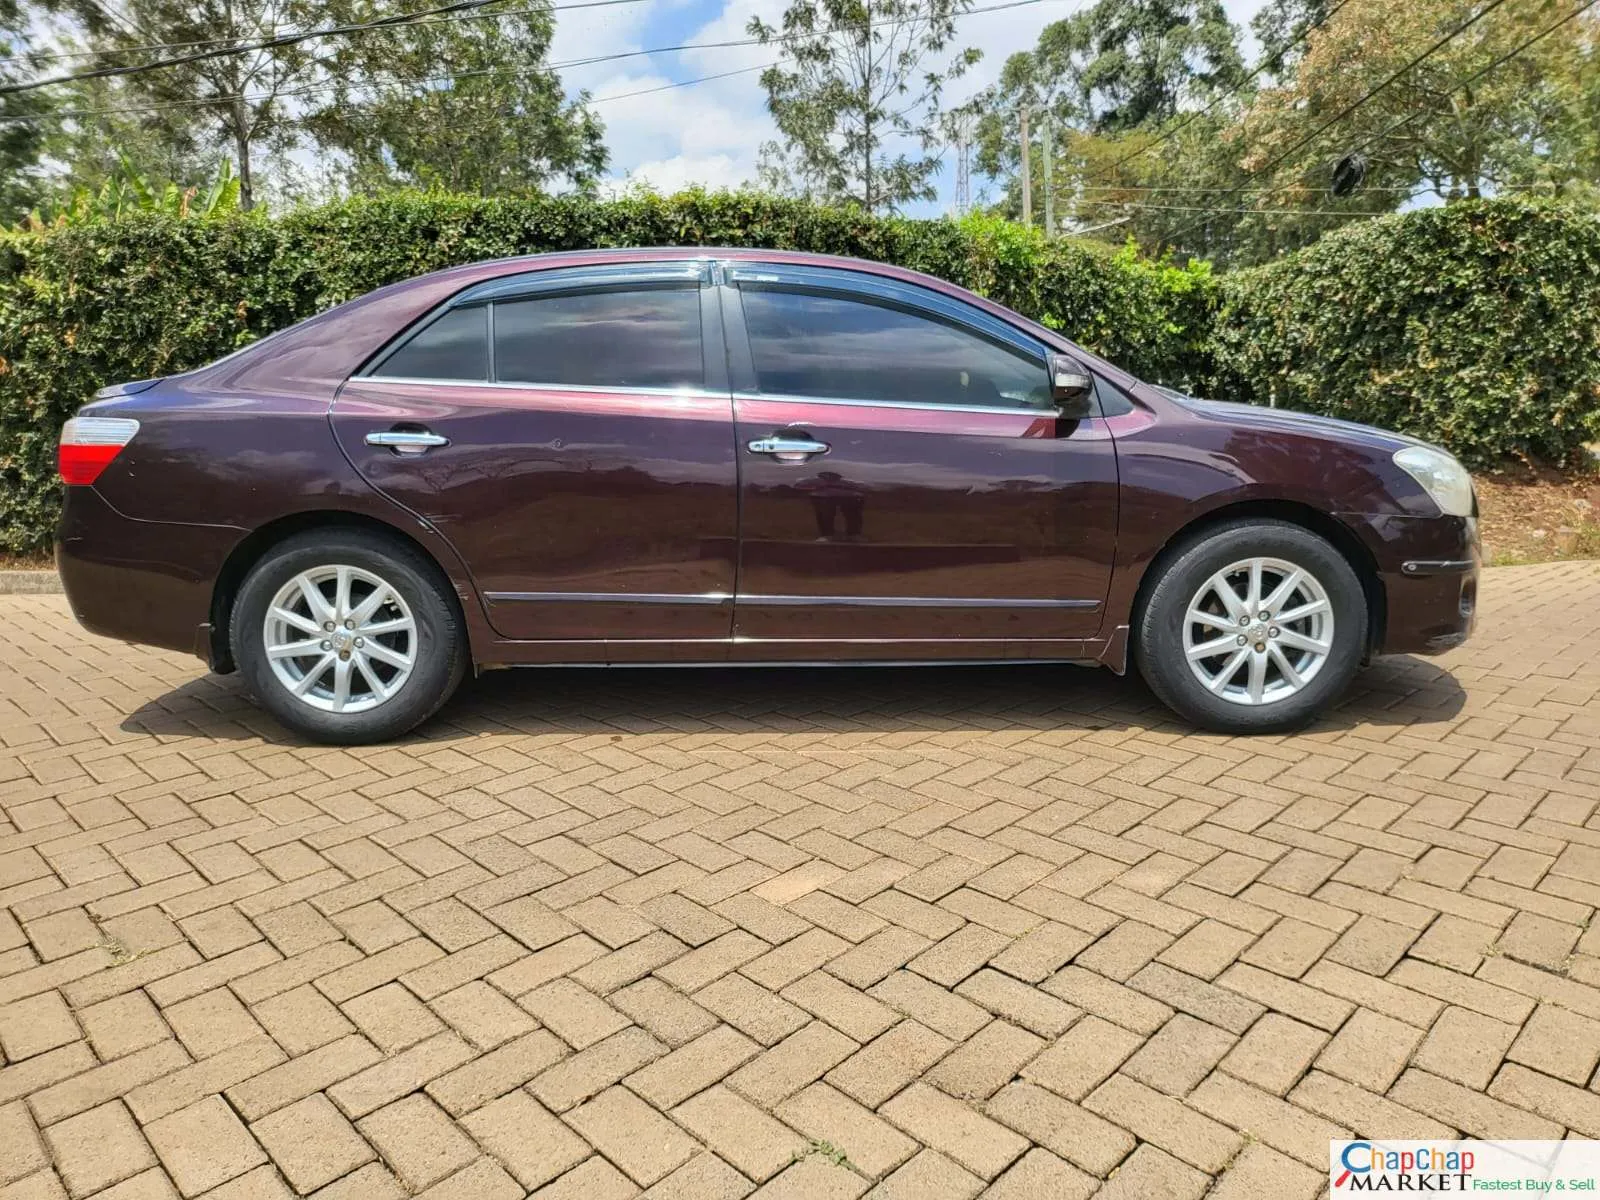 Cars Cars For Sale-Toyota PREMIO new shape You pay 30% Deposit Trade in Ok EXCLUSIVE premio for sale in kenya hire purchase installments 3